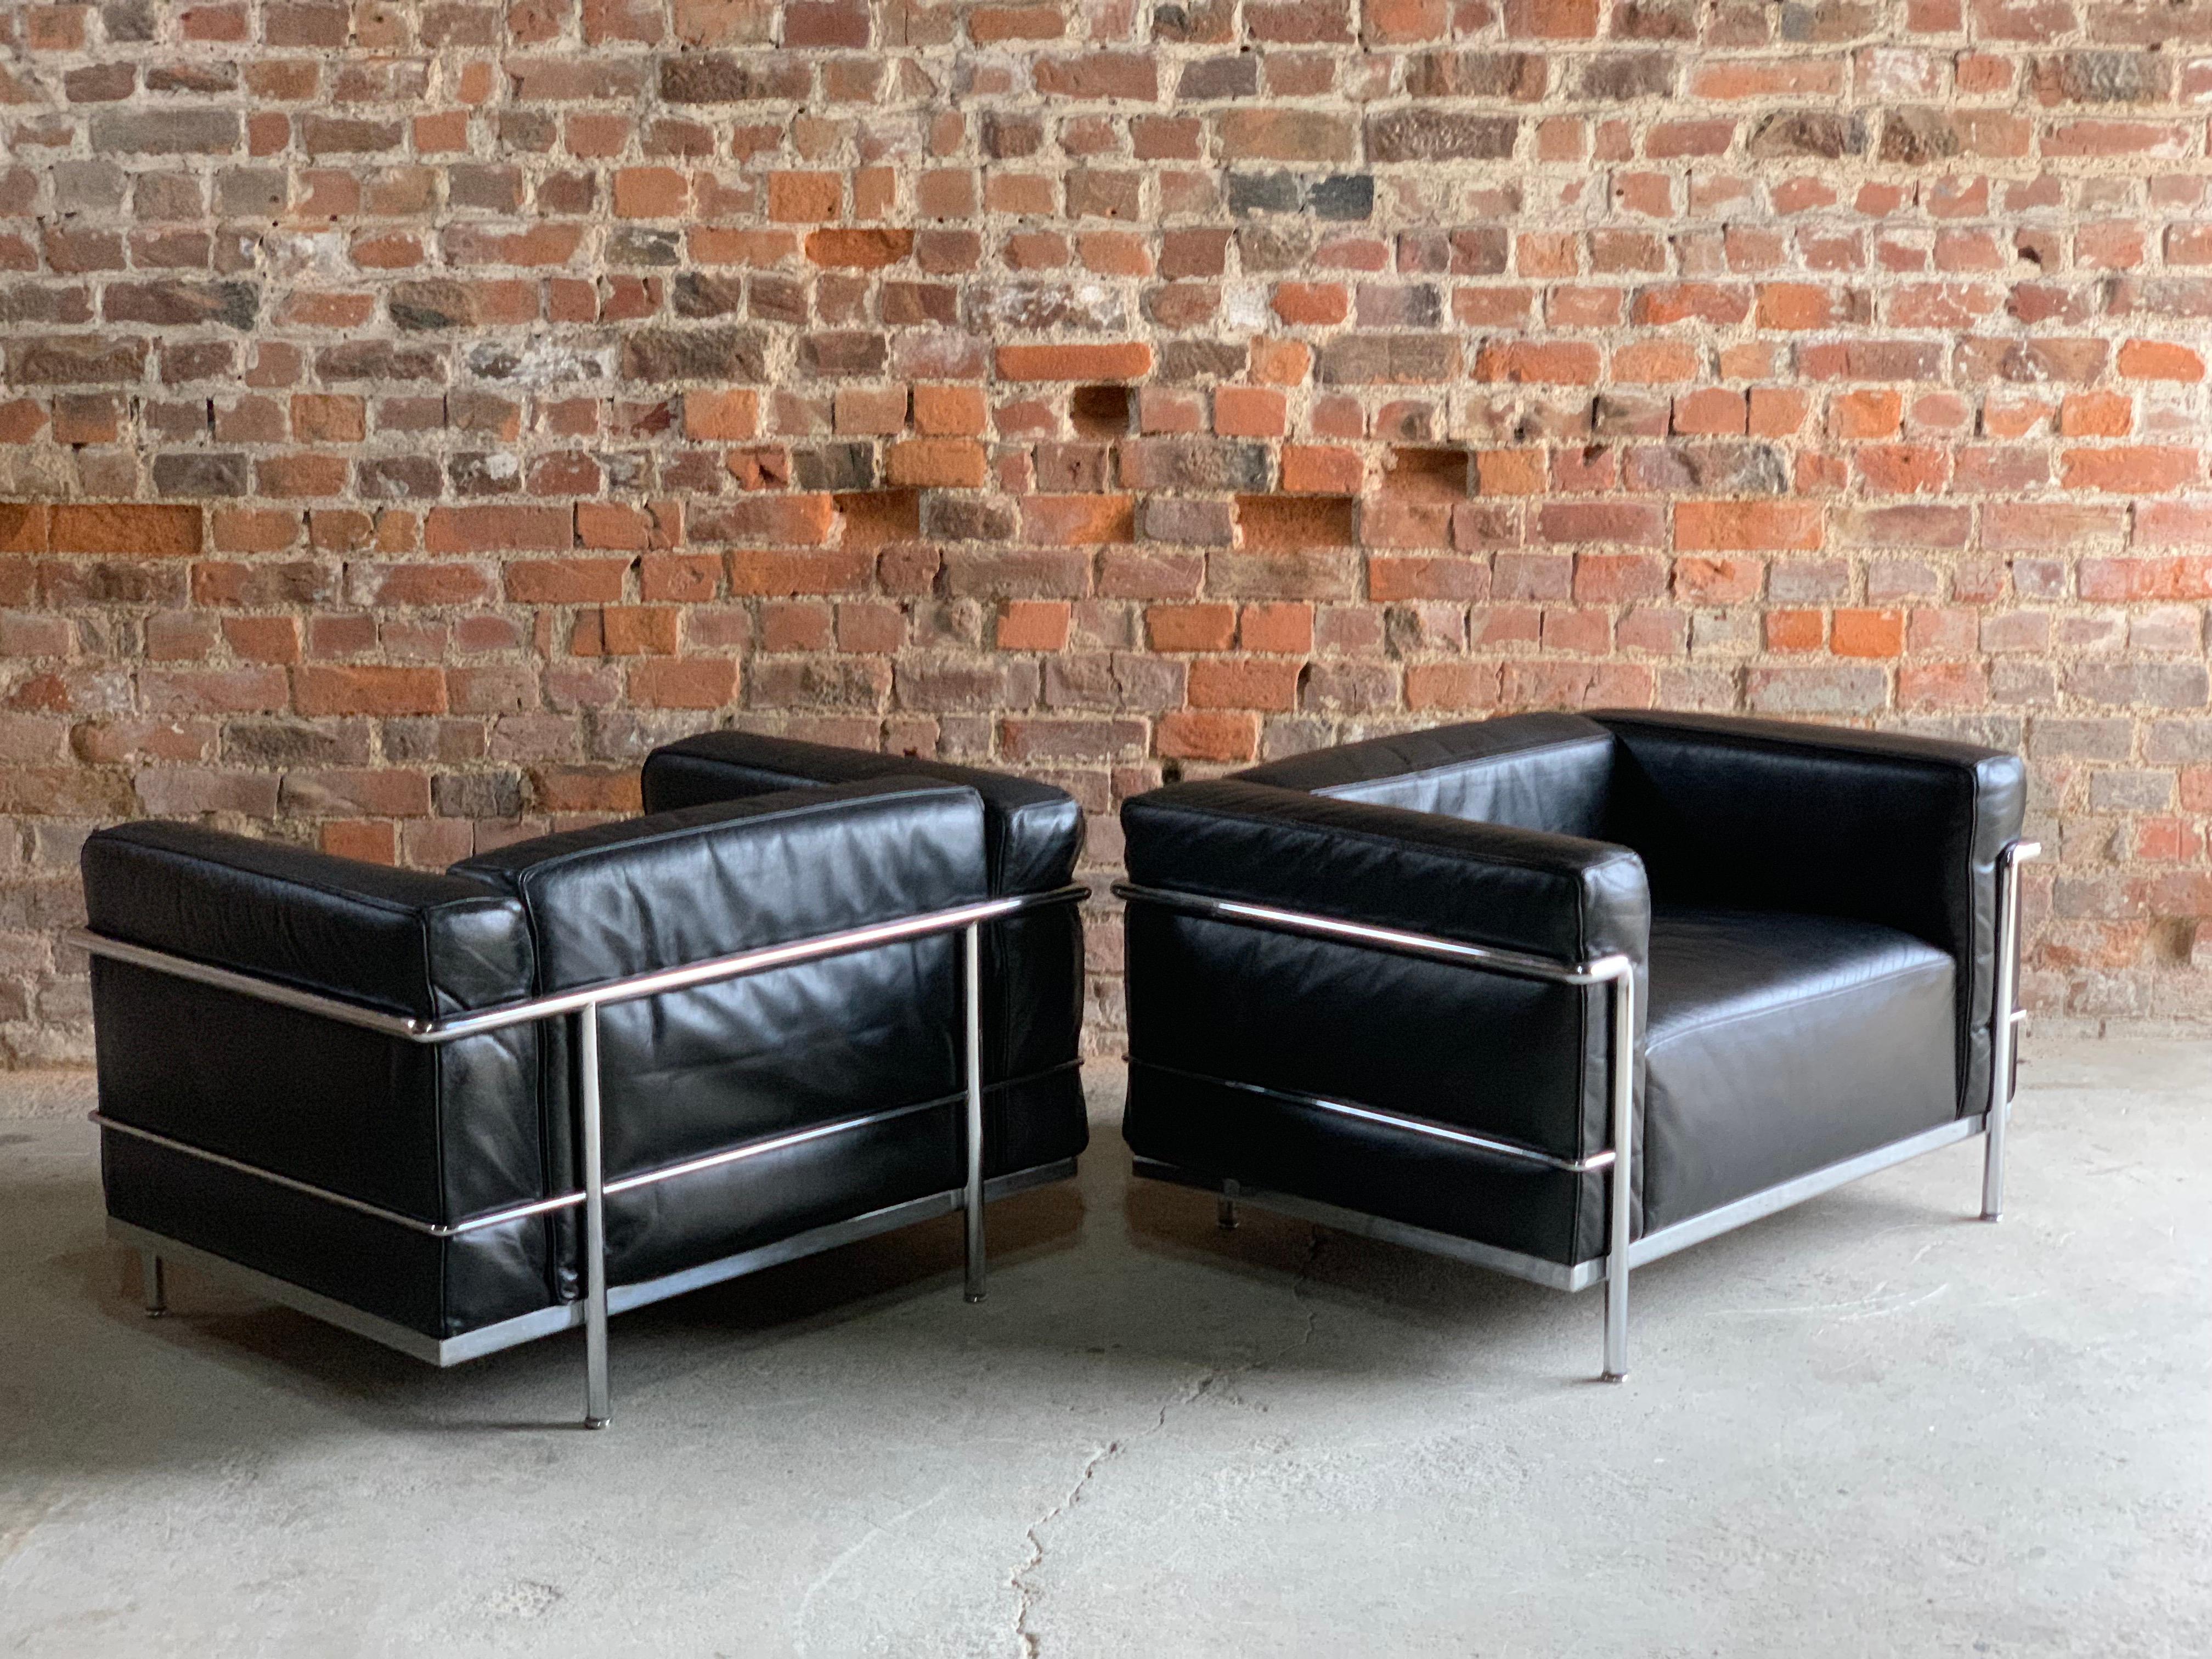 
Le Corbusier LC3 Armchairs by Pierre Jeanneret, and Charlotte Perriand by Cassina

Pair of Le Corbusier Poltrona armchairs, black leather & chrome, with serial number to the underside of the arm LC 3 006246, LC 3 006200, both stamped Cassina.

The